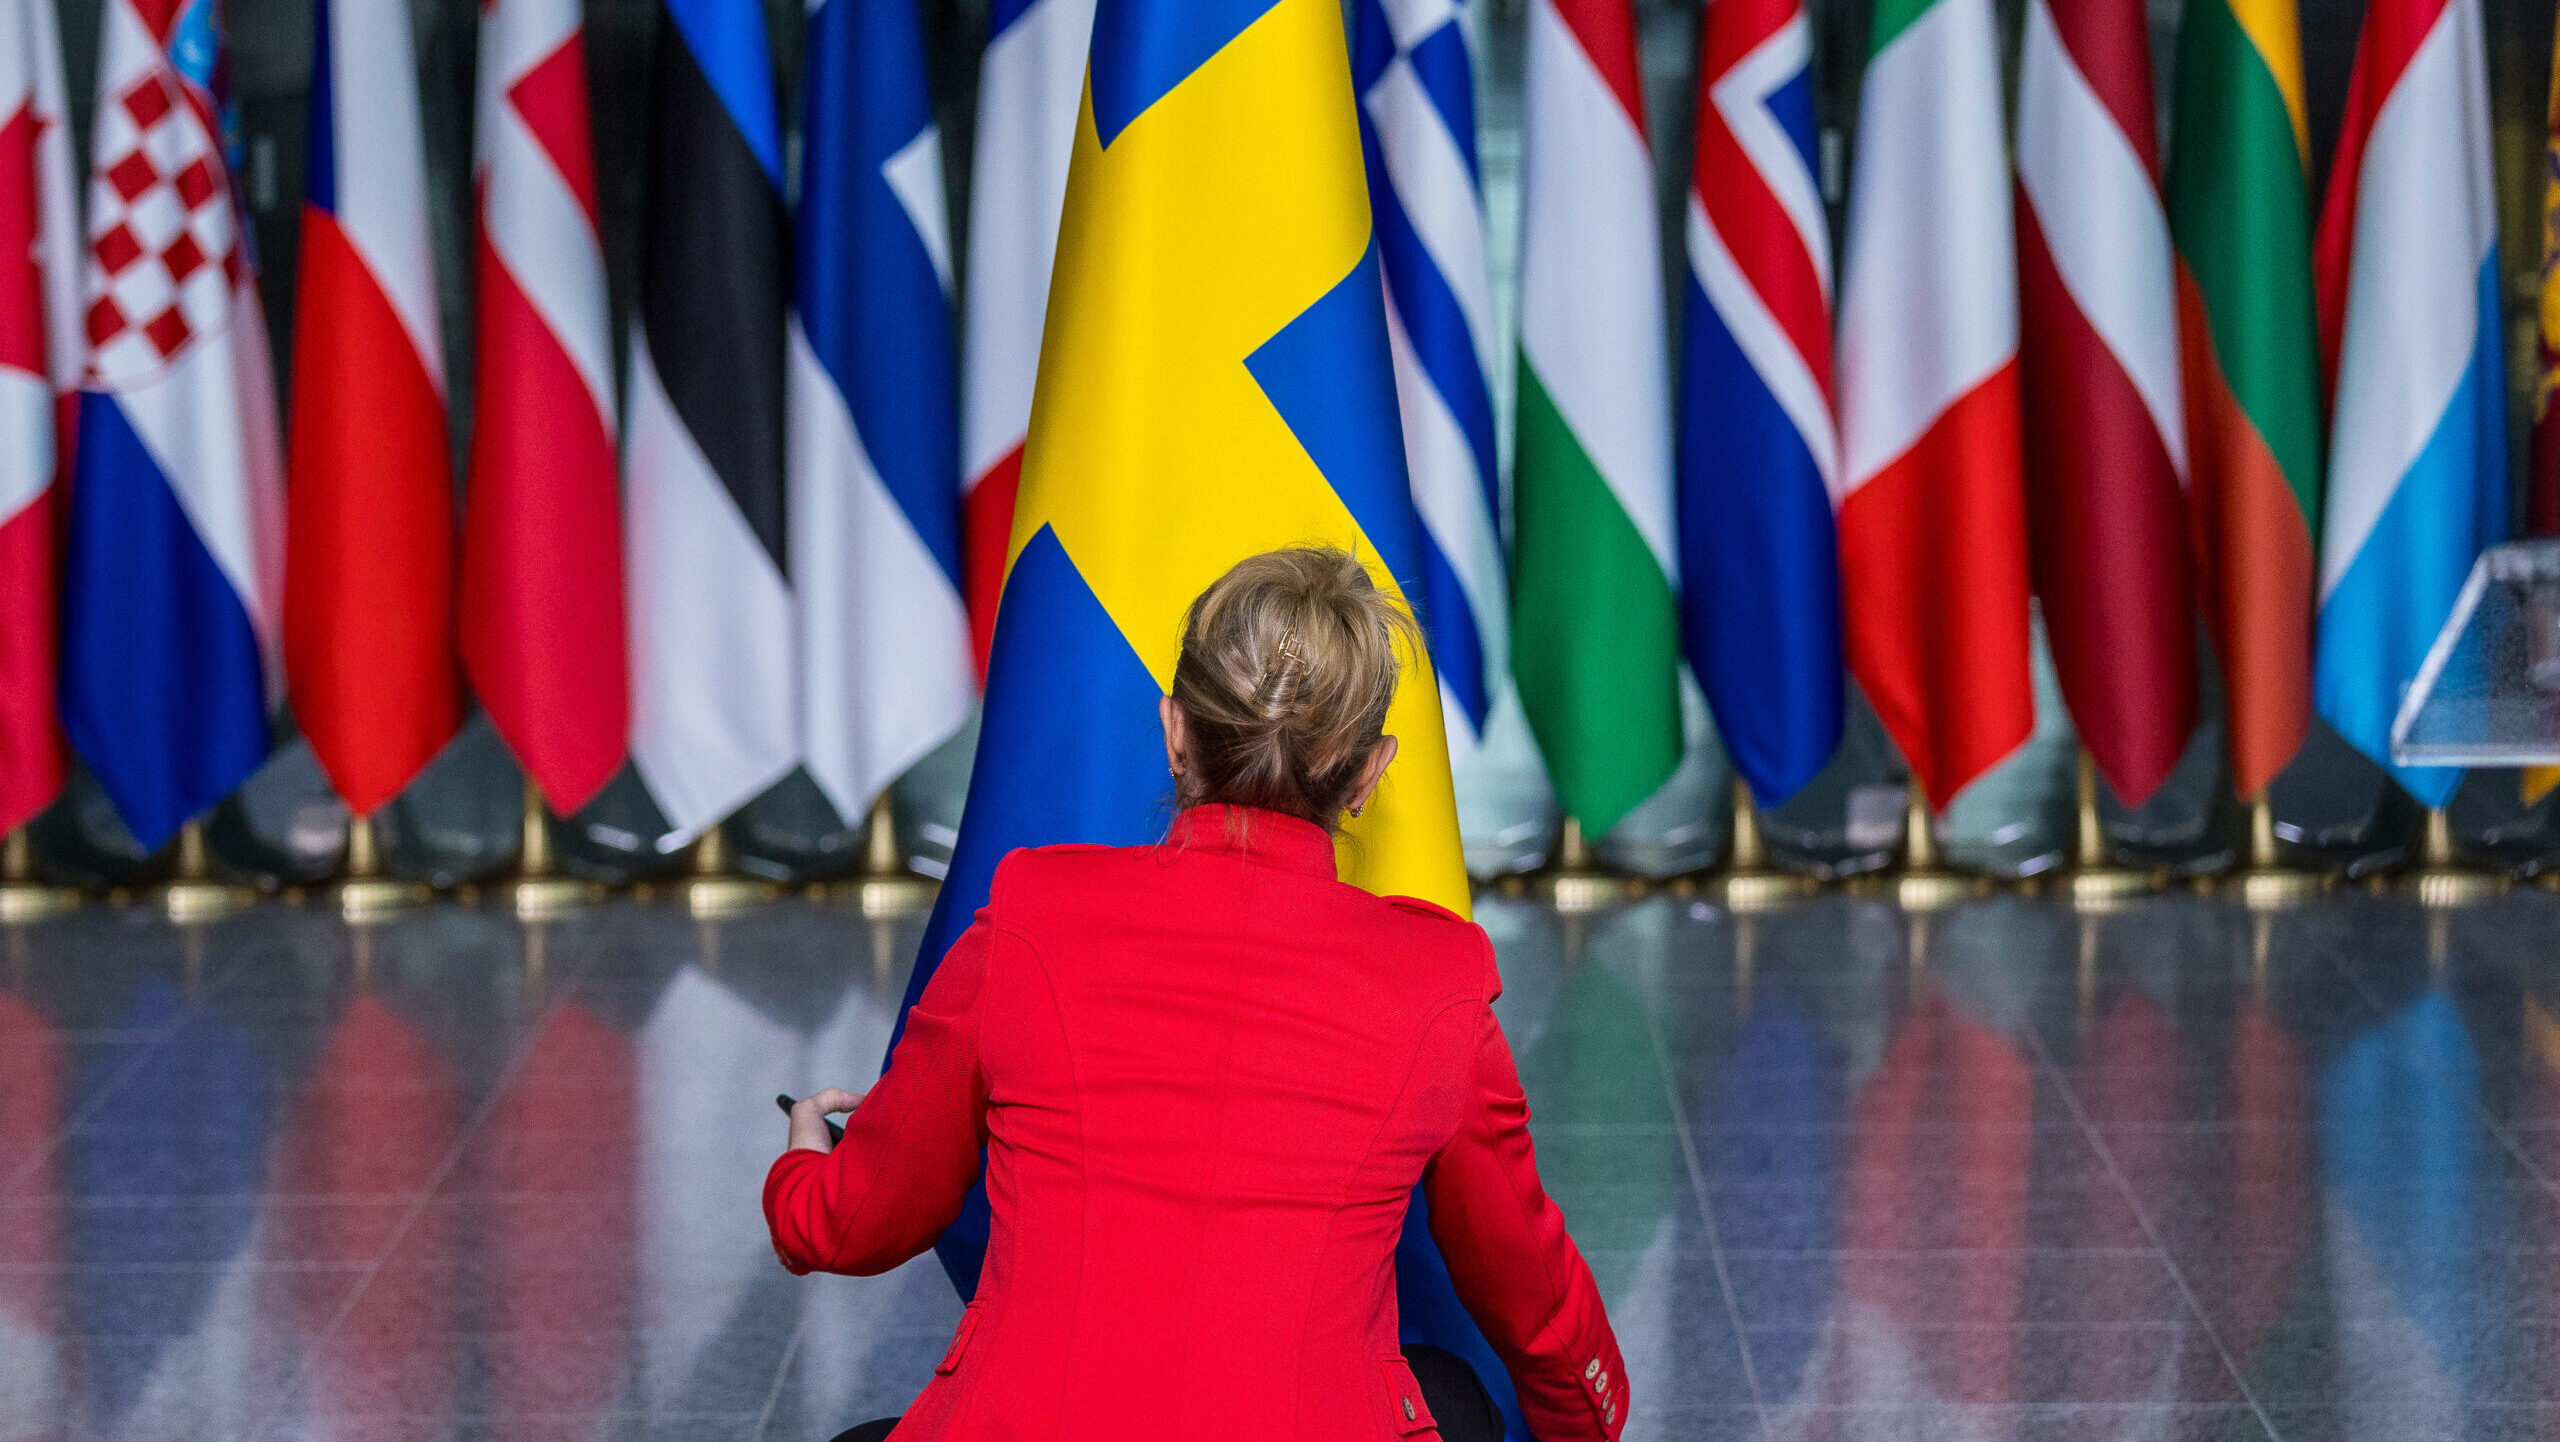 NATO raises Swedish flag as Nordic nation takes ‘rightful place’ in alliance